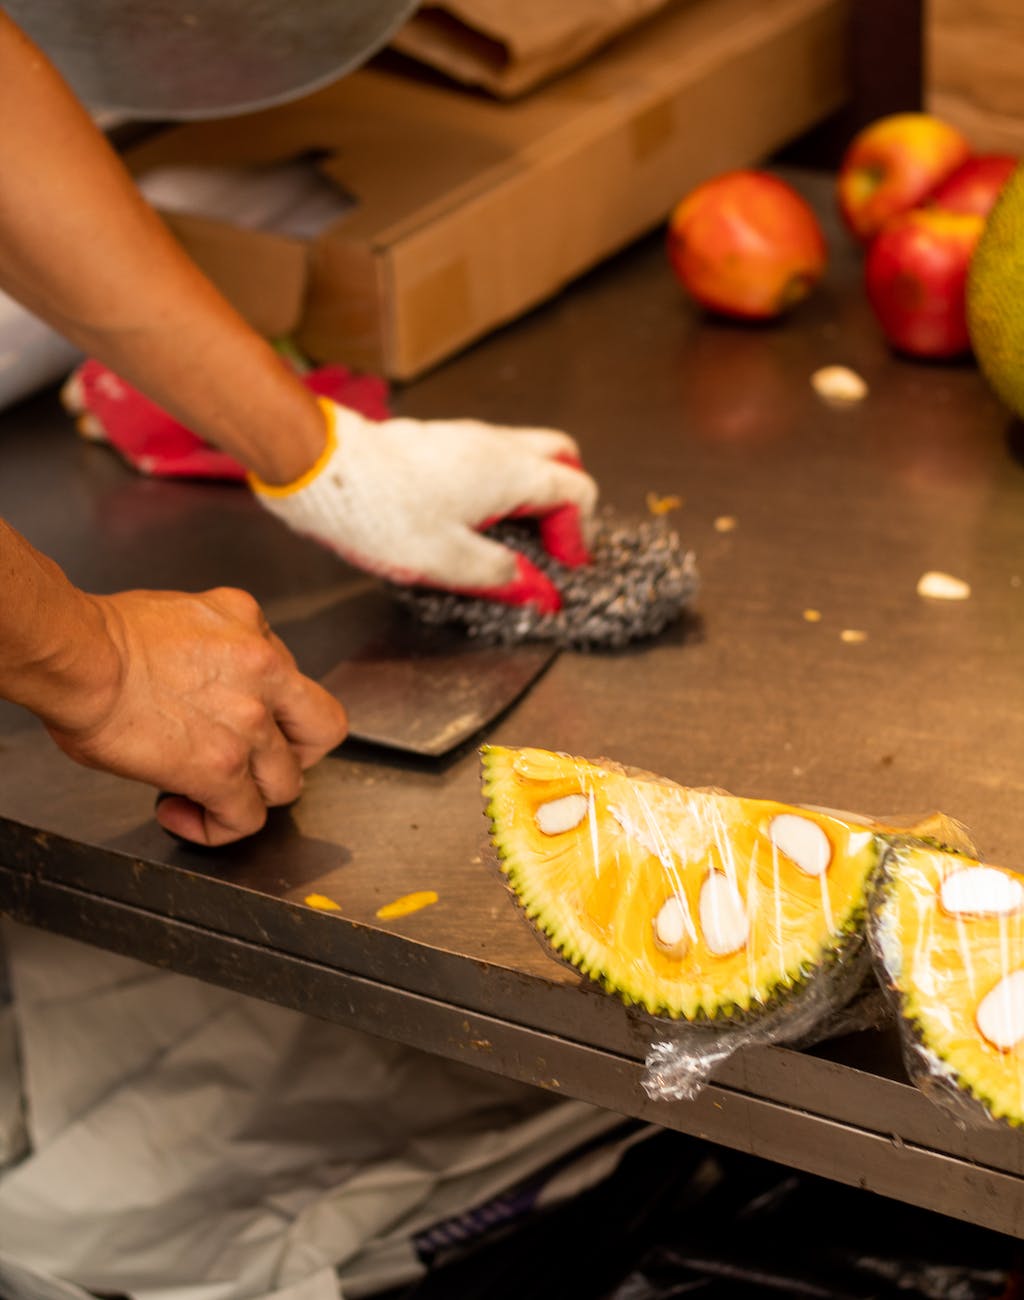 sliced yellow fruit near a person cleaning the knife